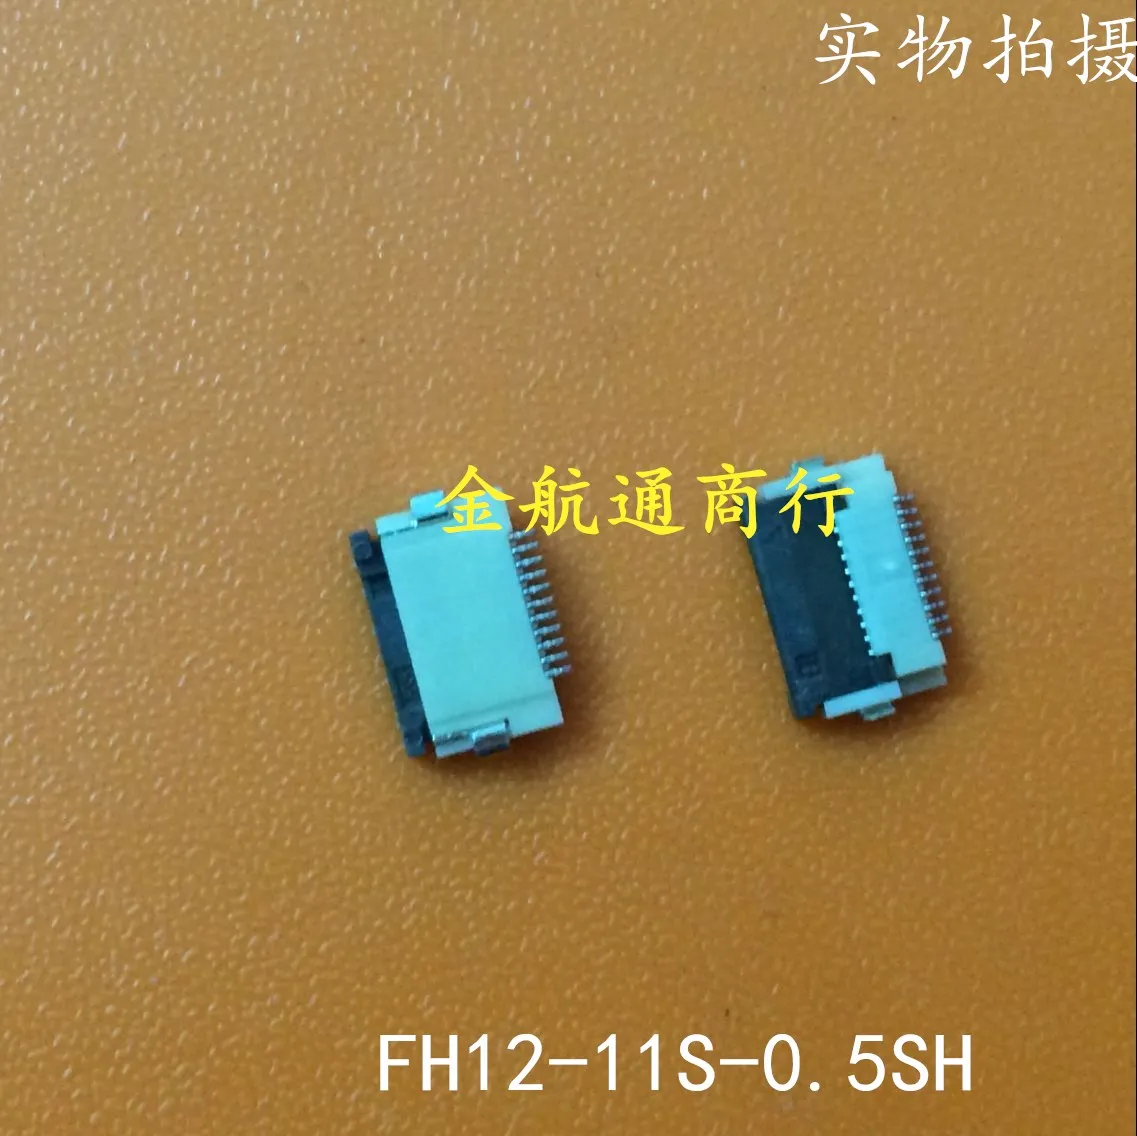 

50pcs/lot FH12-11S-0.5SH Pitch 0.5-11P under the flip cover Connector 100% new and original